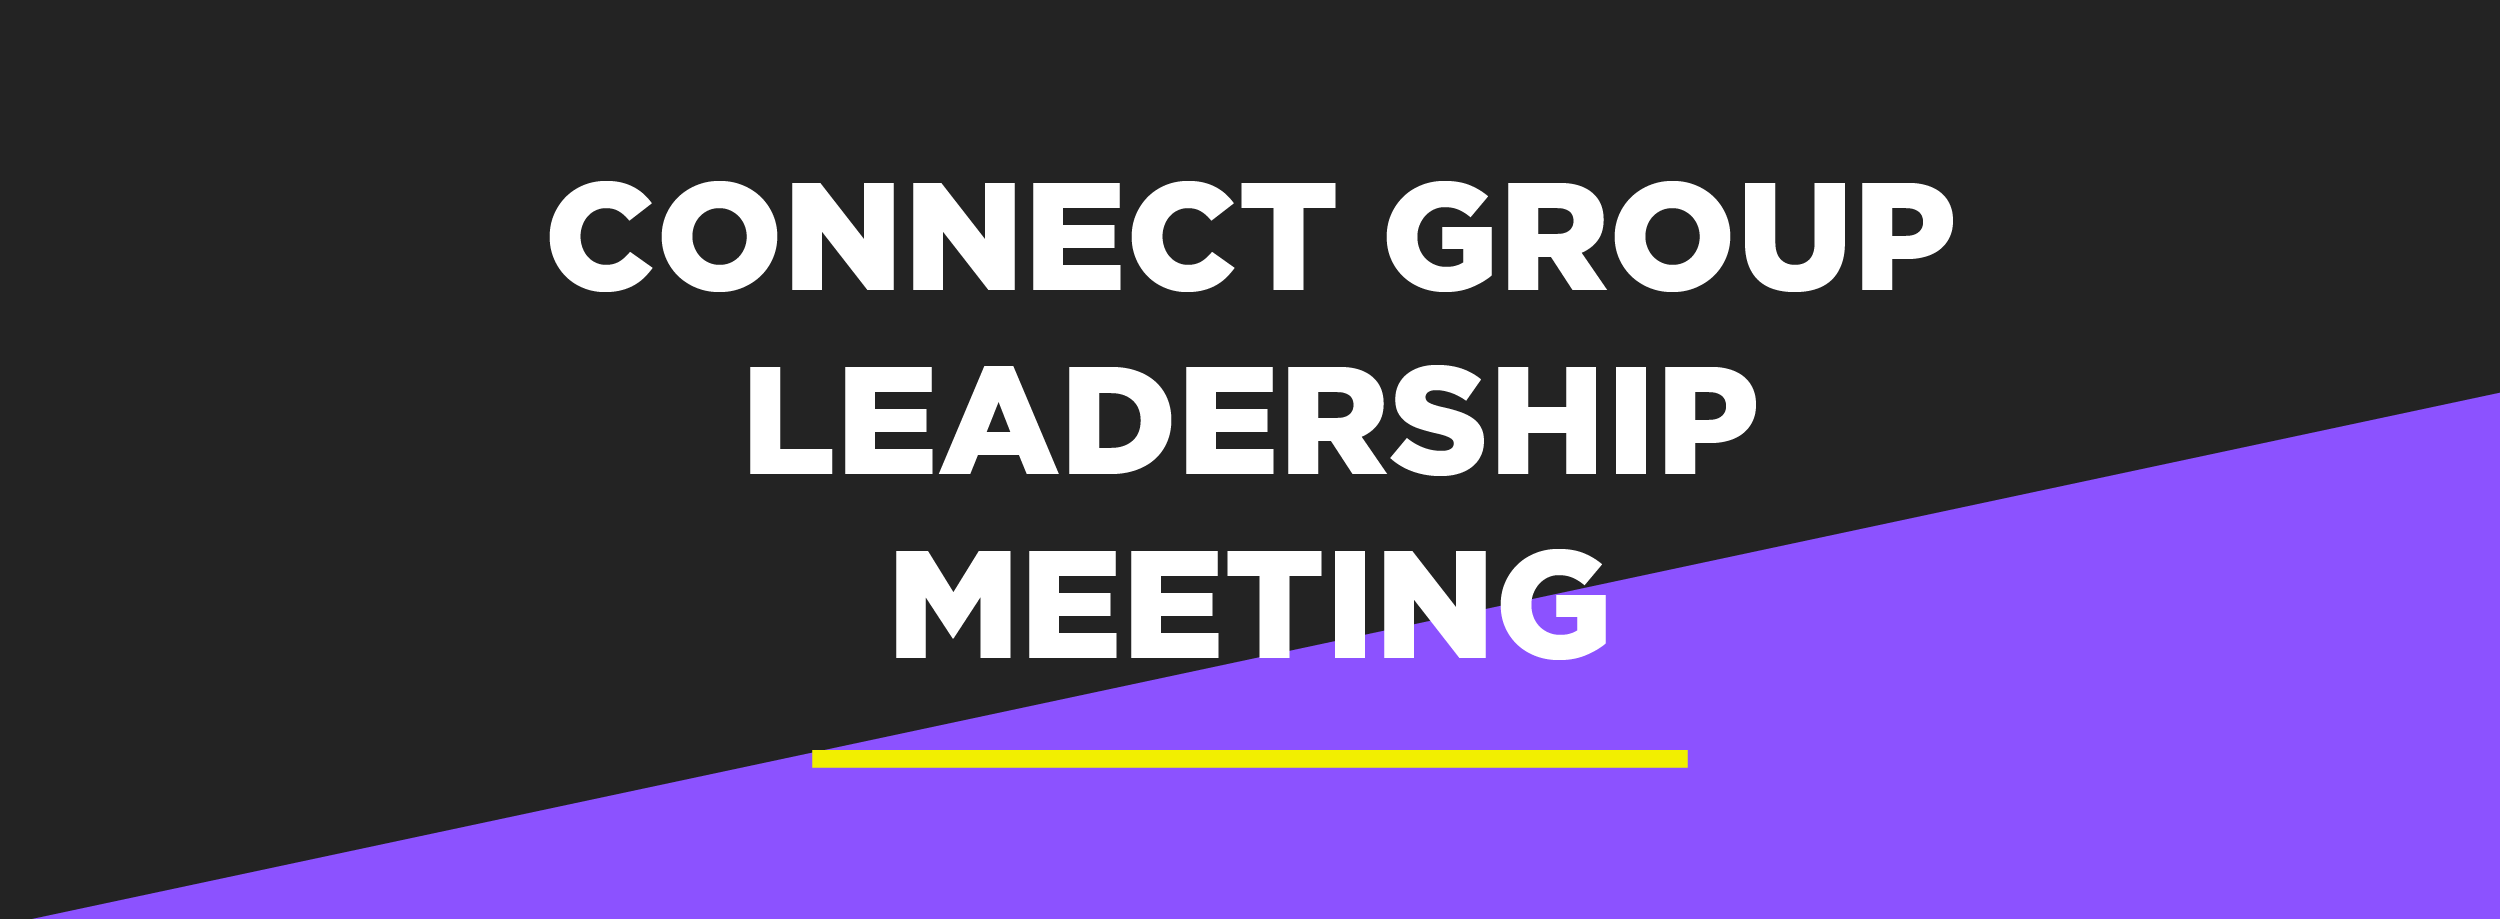 Connect Group Leadership Meeting